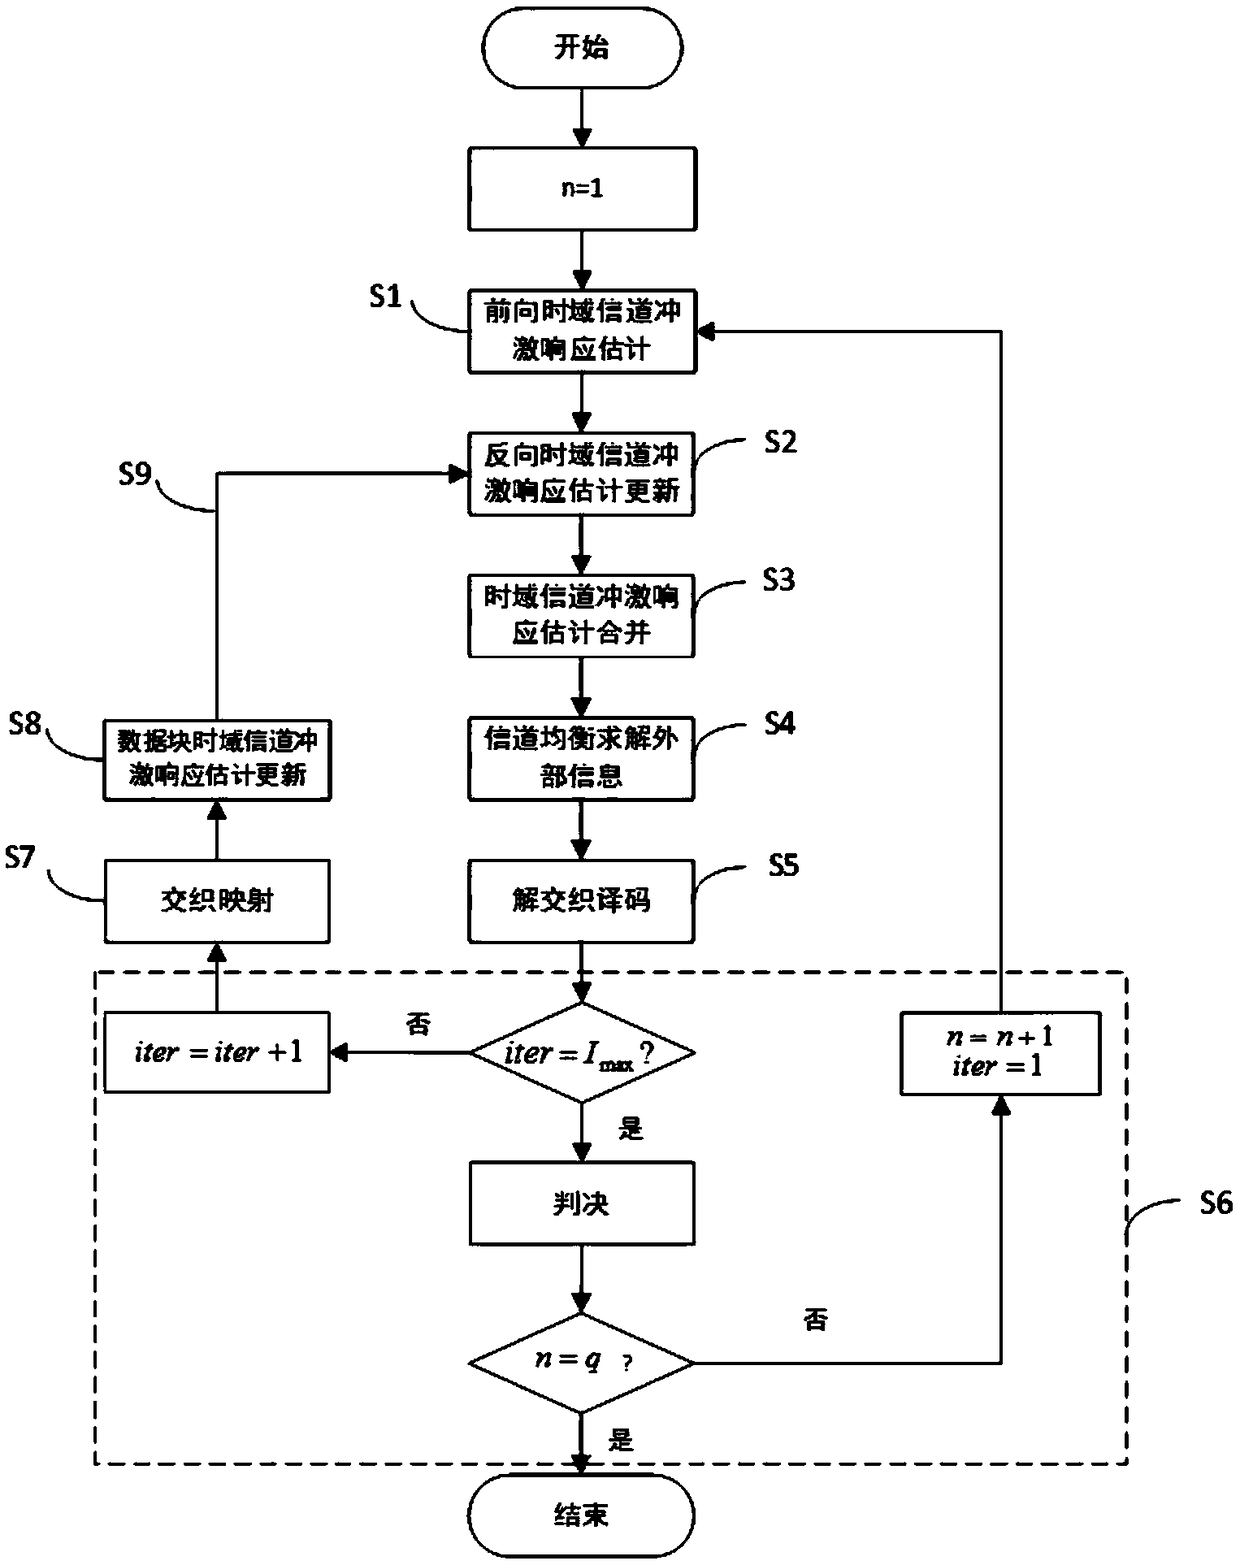 Soft information iterative receiving method based on bidirectional time domain equalization